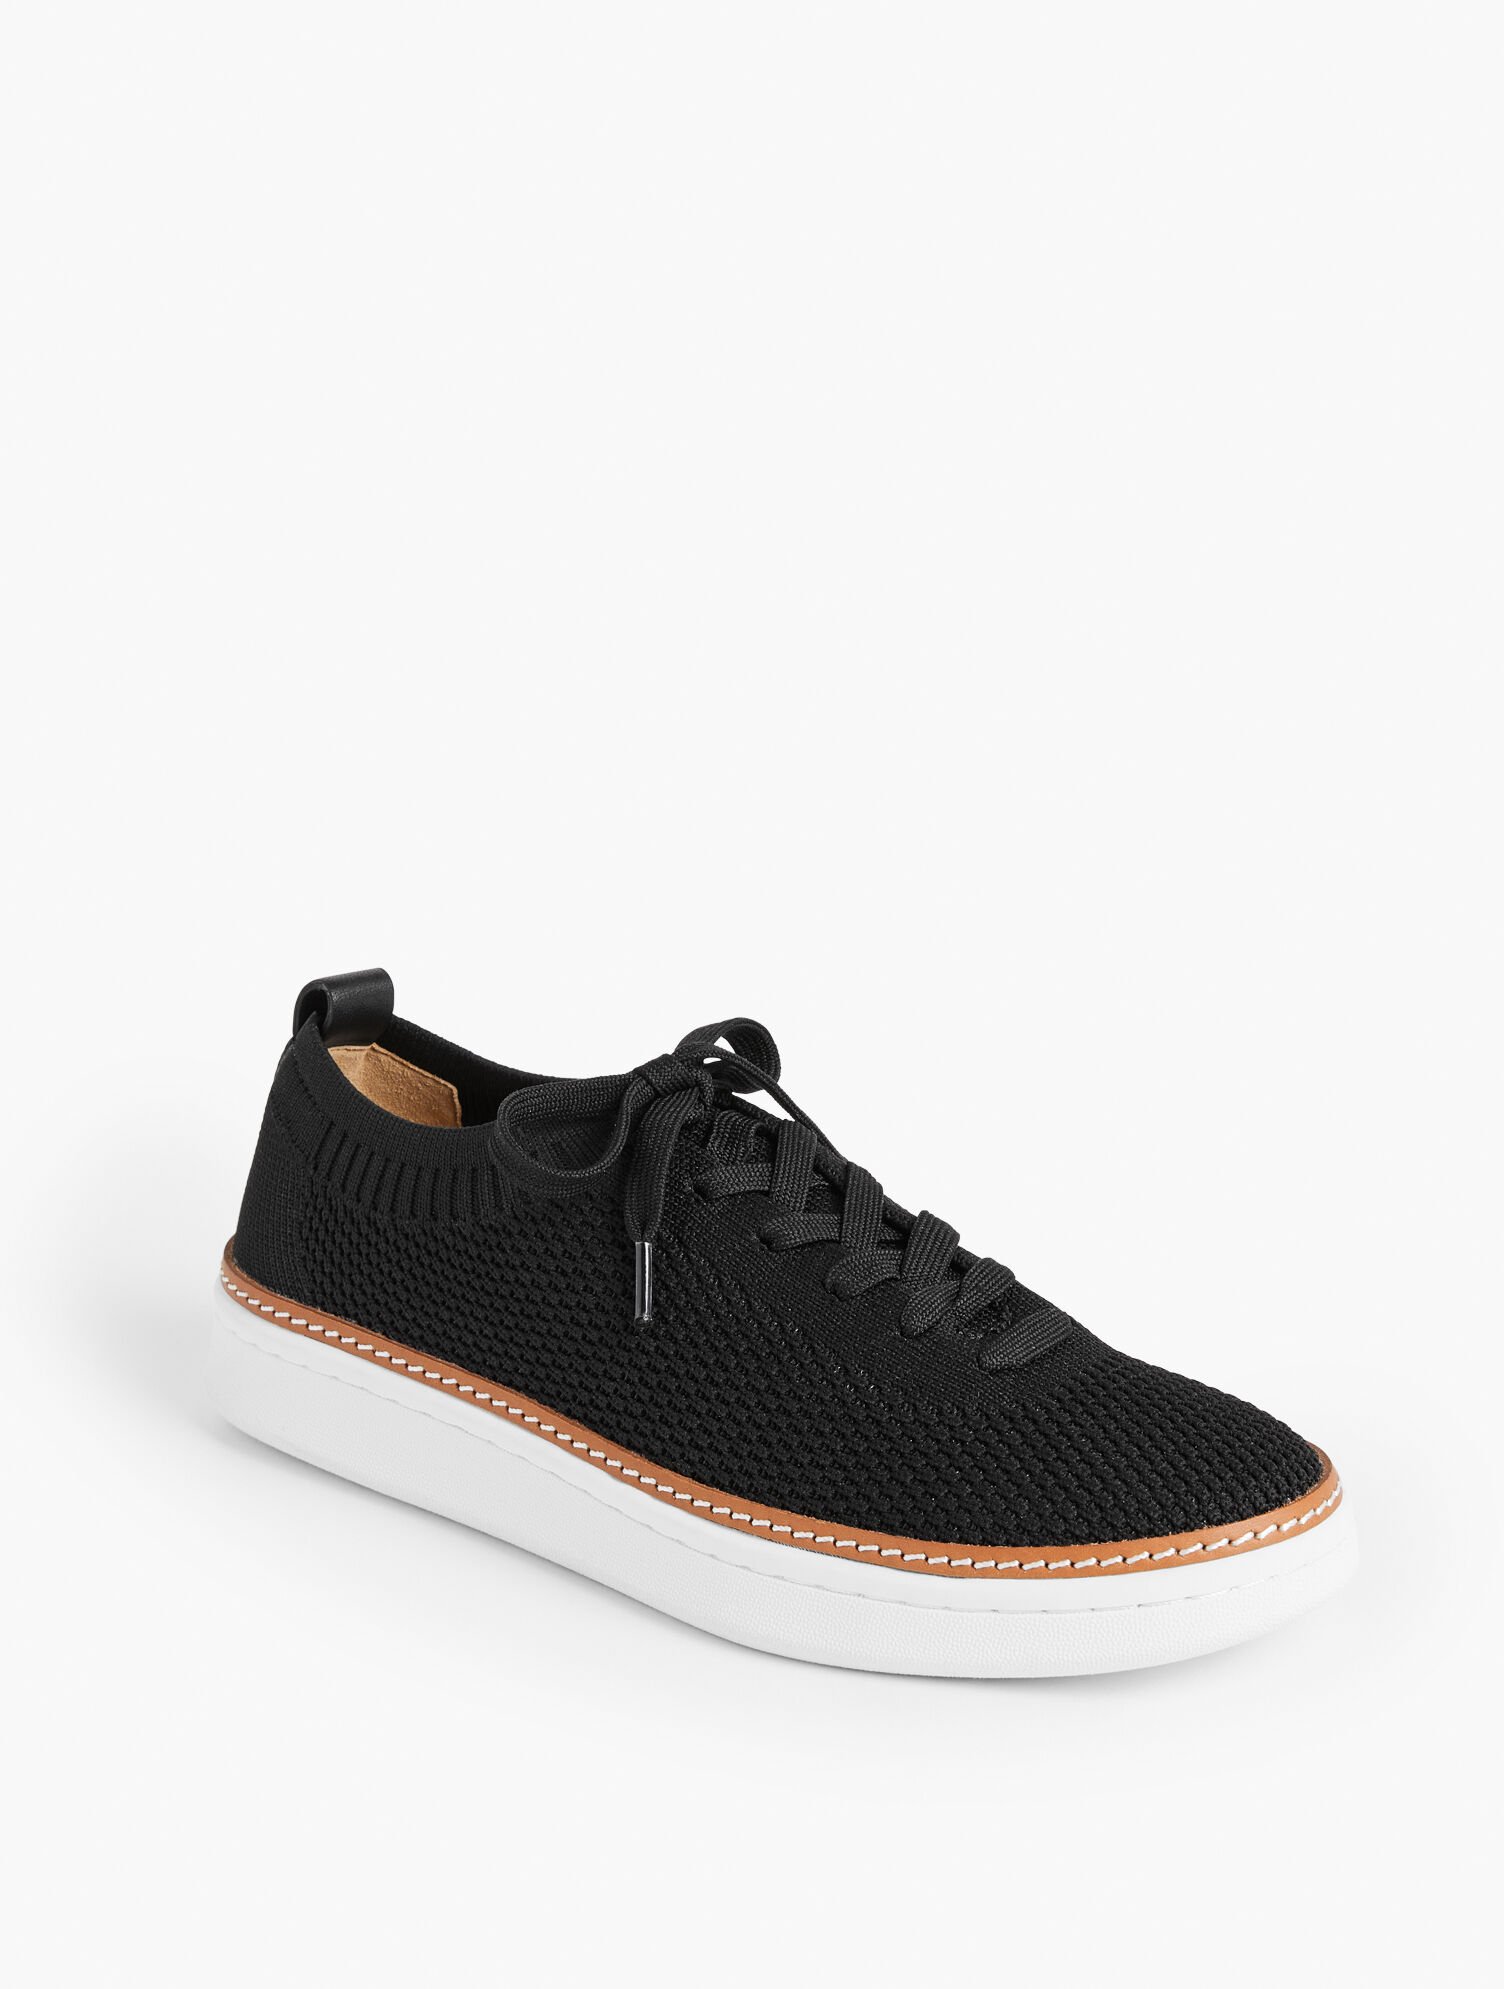 Brittany Knit Sneakers - Black - 9 1/2 M Talbots